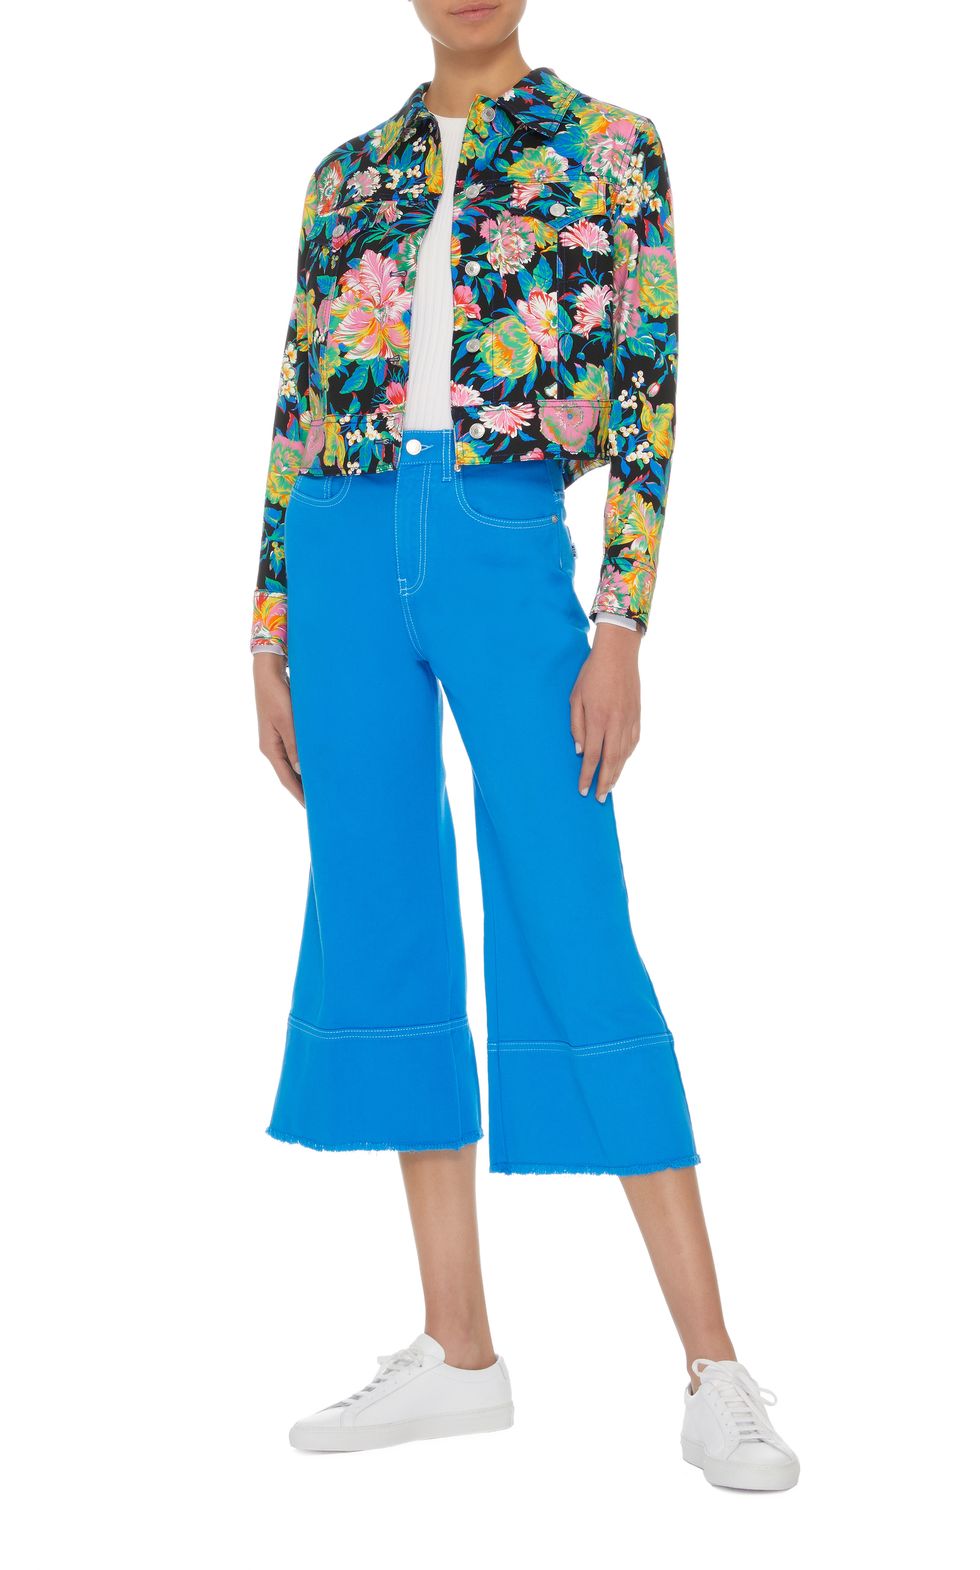 Bright Culotte Jeans in Your New Fave Color 